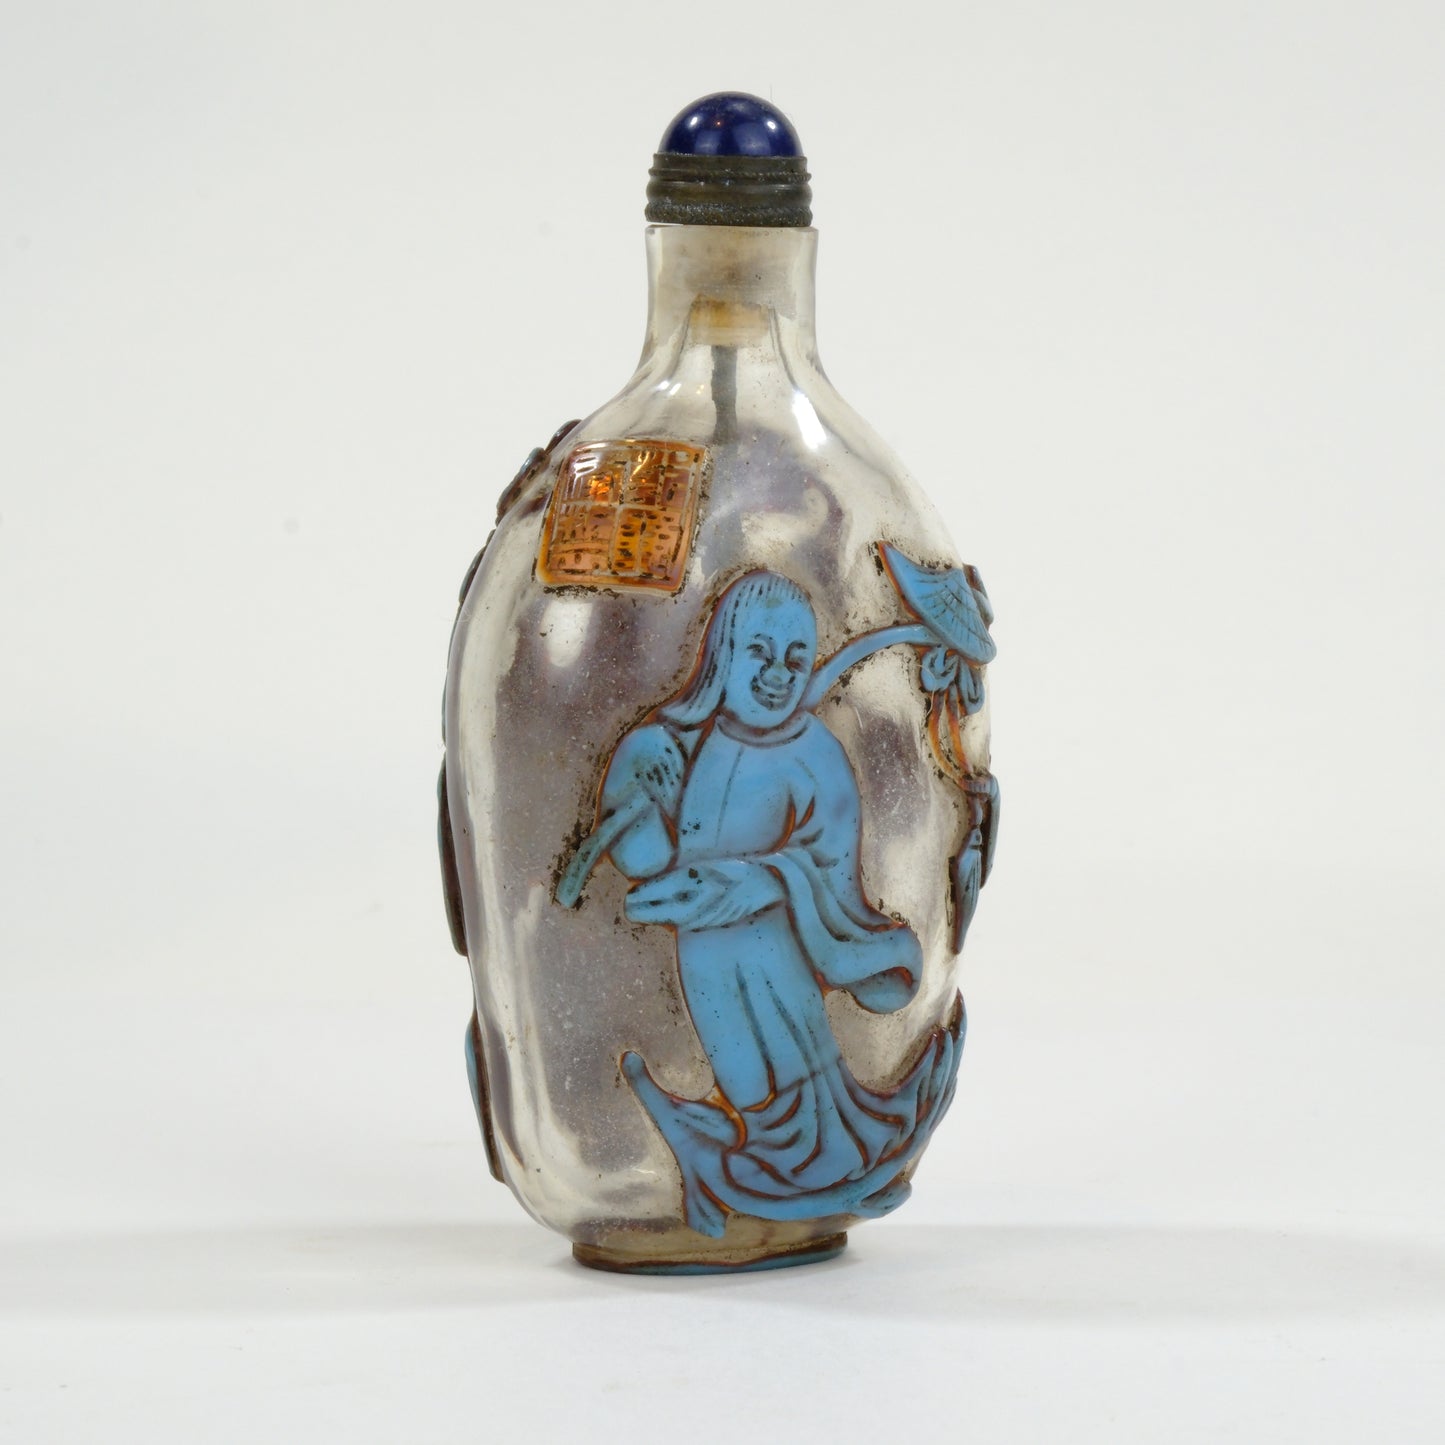 Vintage Chinese Glass Snuff Bottle Lucky Gods 3"